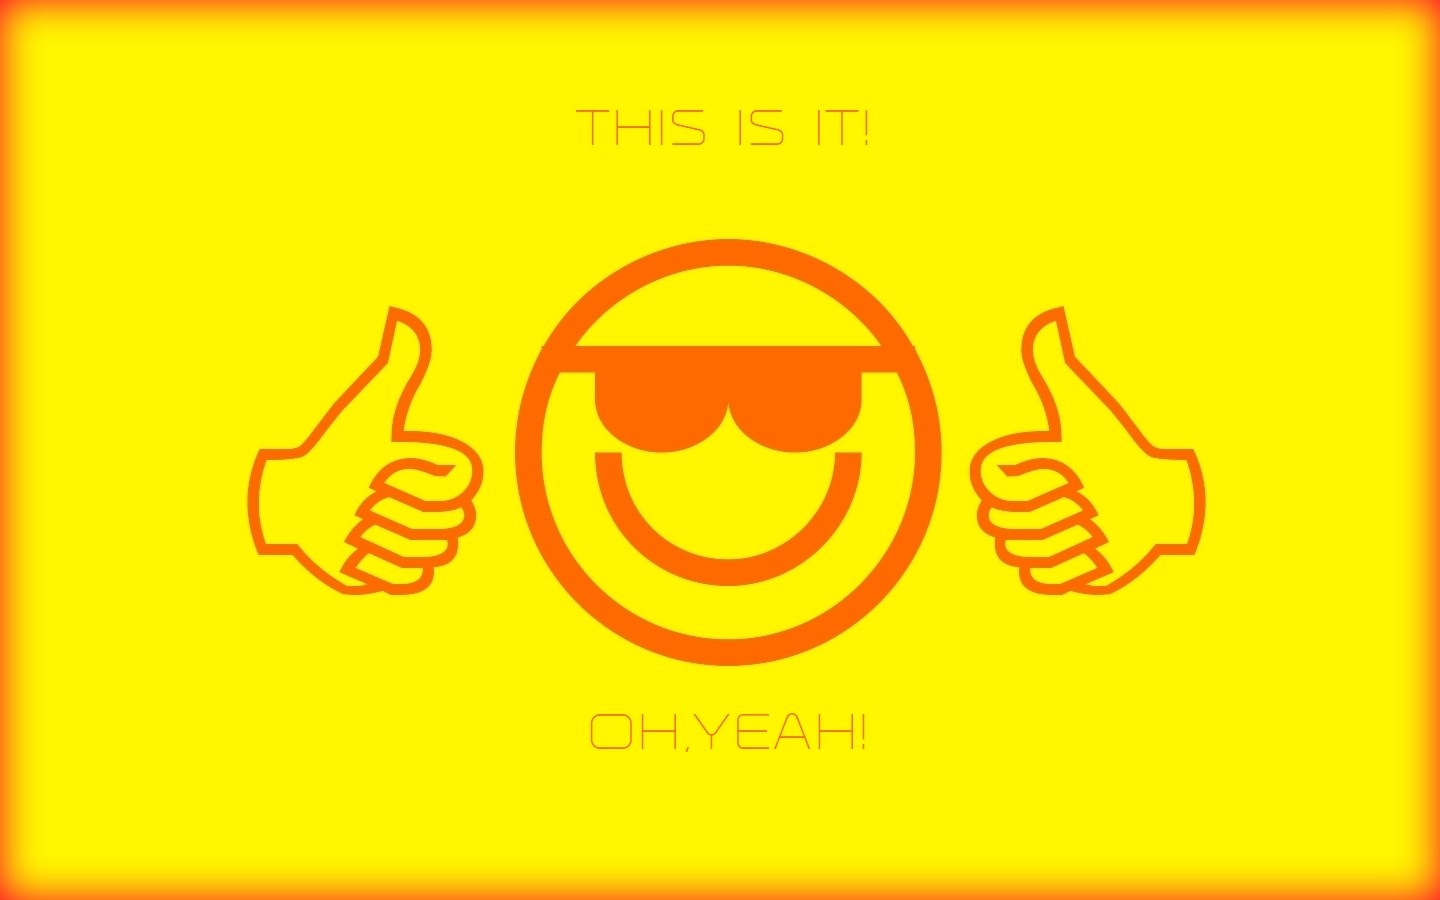 General 1440x900 thumbs up smiley yellow background quote